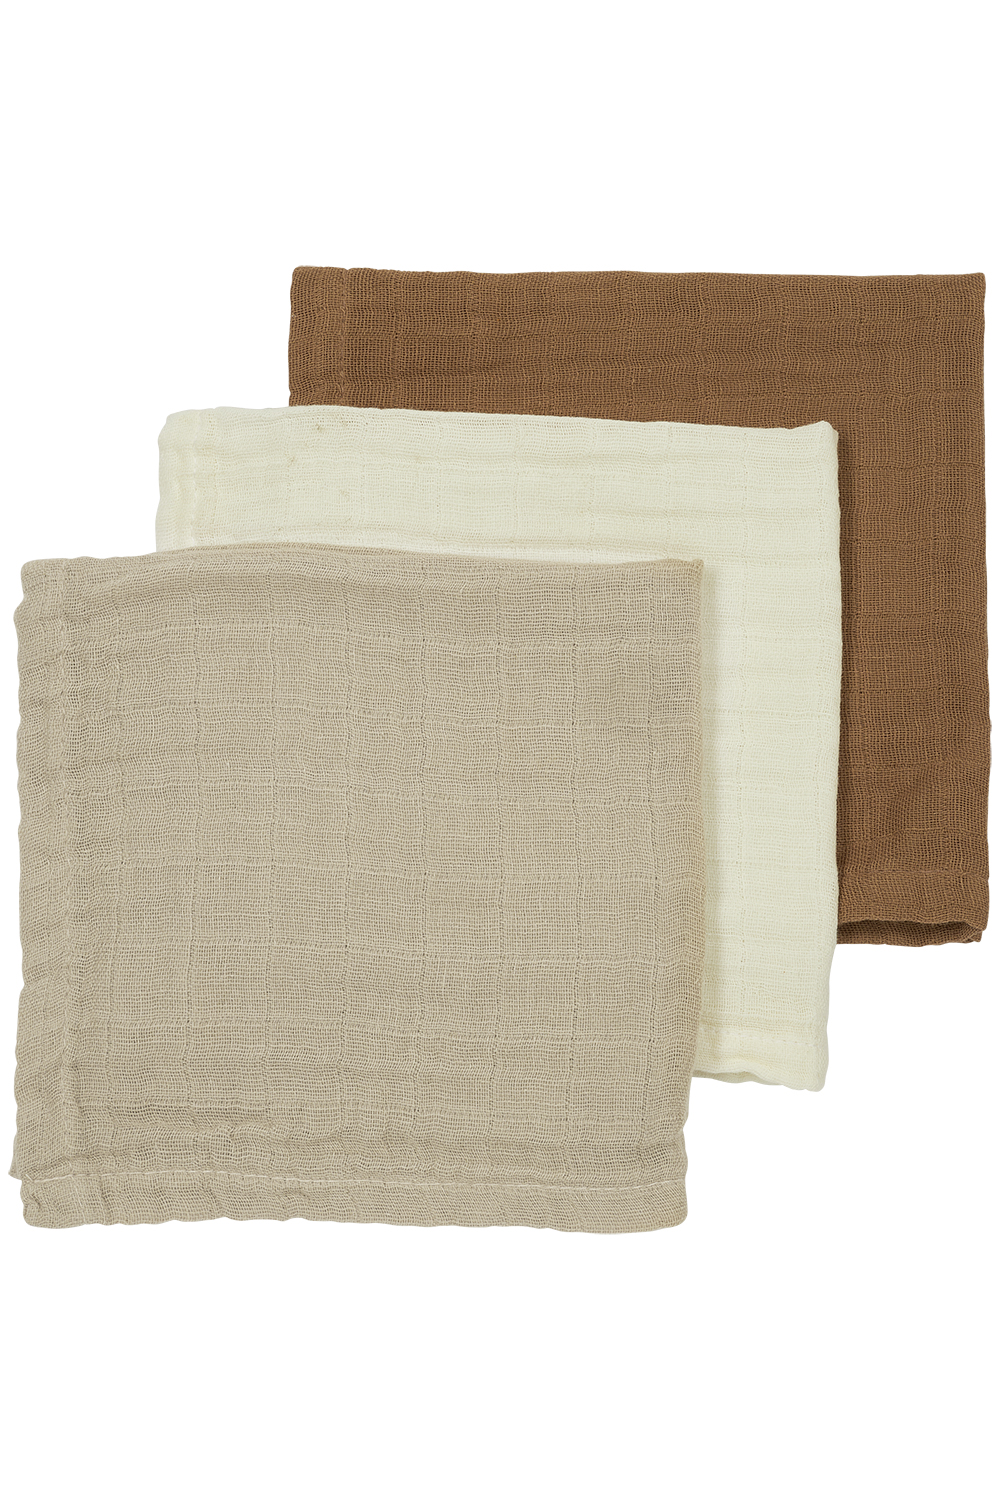 Spucktücher 3er pack pre-washed musselin Uni - offwhite/sand/toffee - 30x30cm